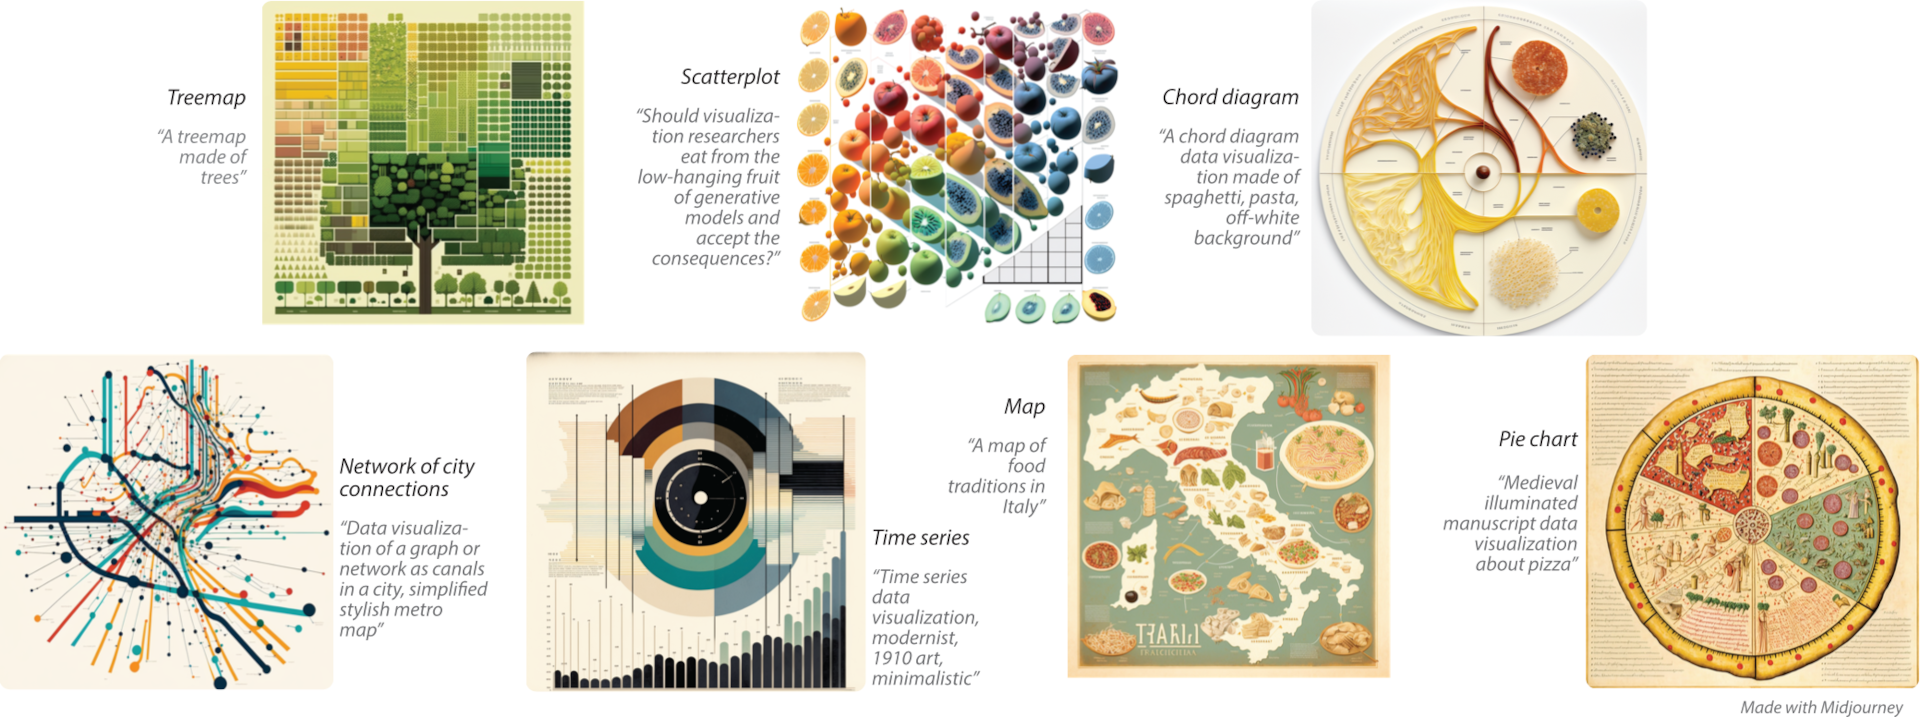 Different types of data visualization (and the prompts used to create them) as imagined by text-to-image generative models. While these examples are delicious (in their graphical intrigue and exploration of style), they risk doom by potentially creating misplaced trust.